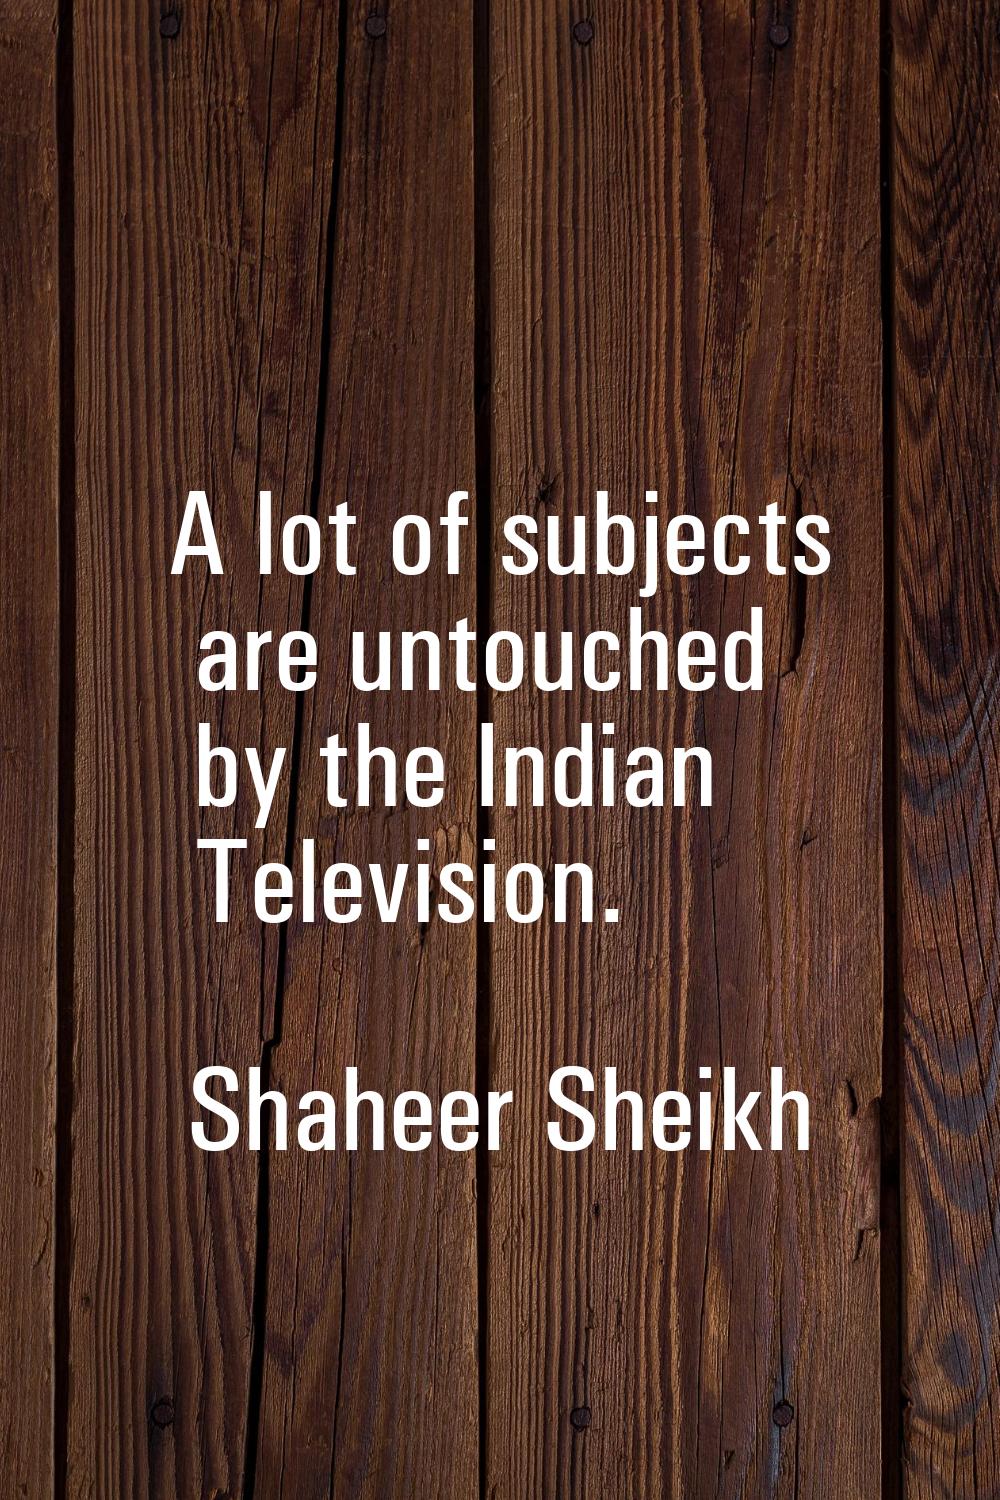 A lot of subjects are untouched by the Indian Television.